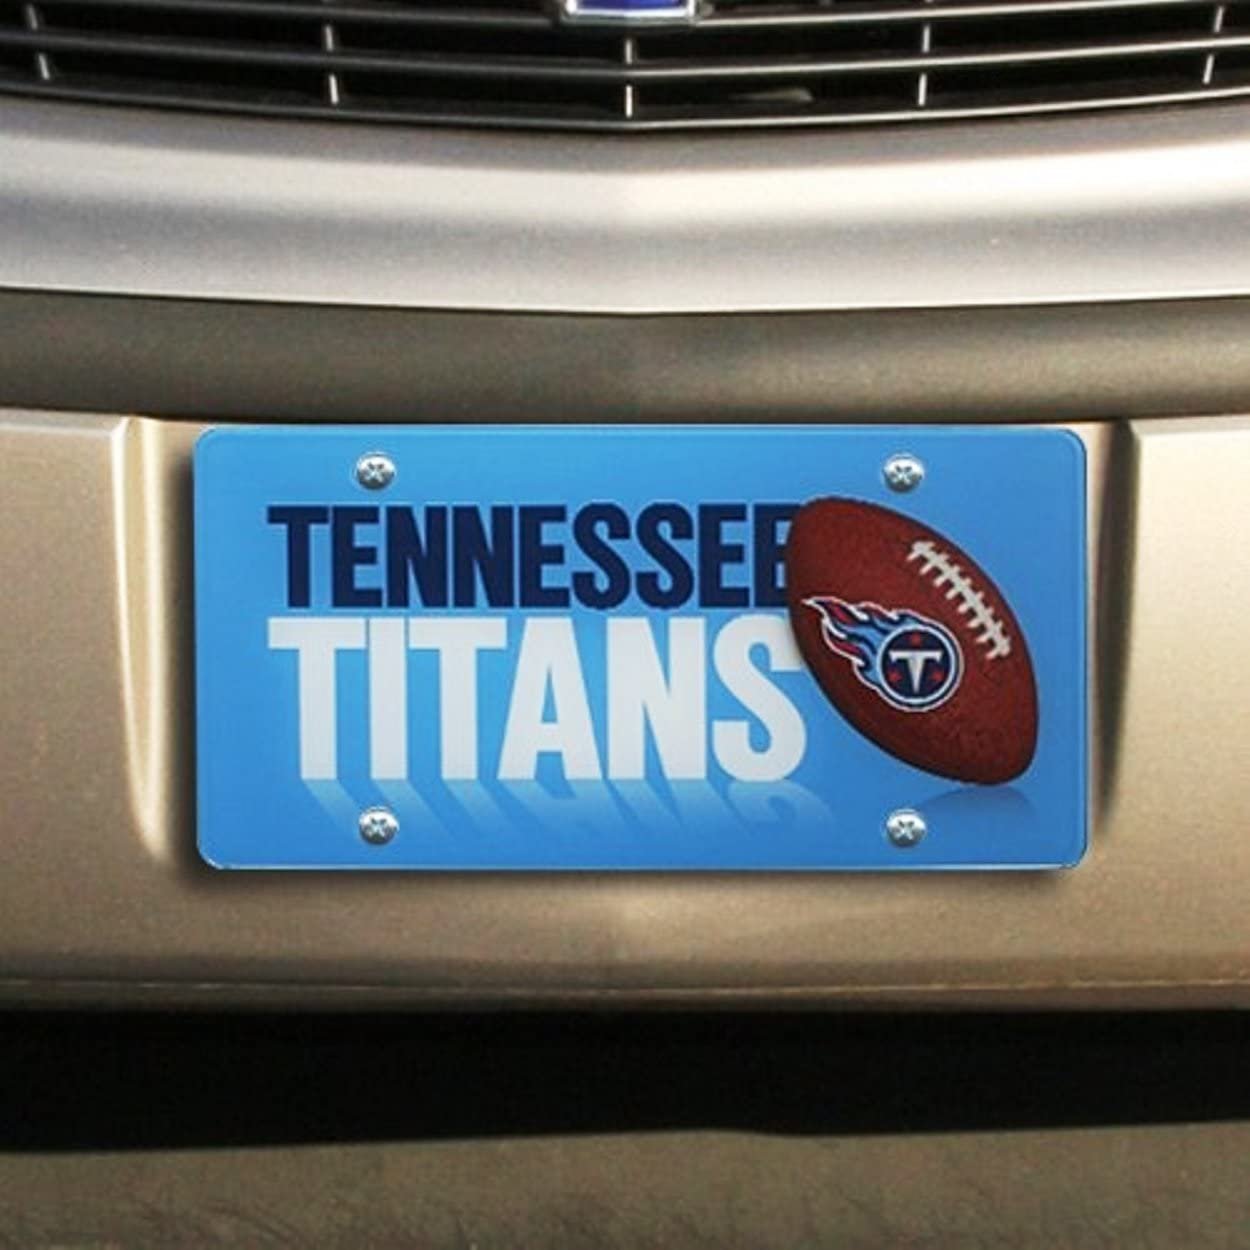 Tennessee Titans Premium Laser Tag License Plate, Mirrored Acrylic, Printed, 12x6 Inch